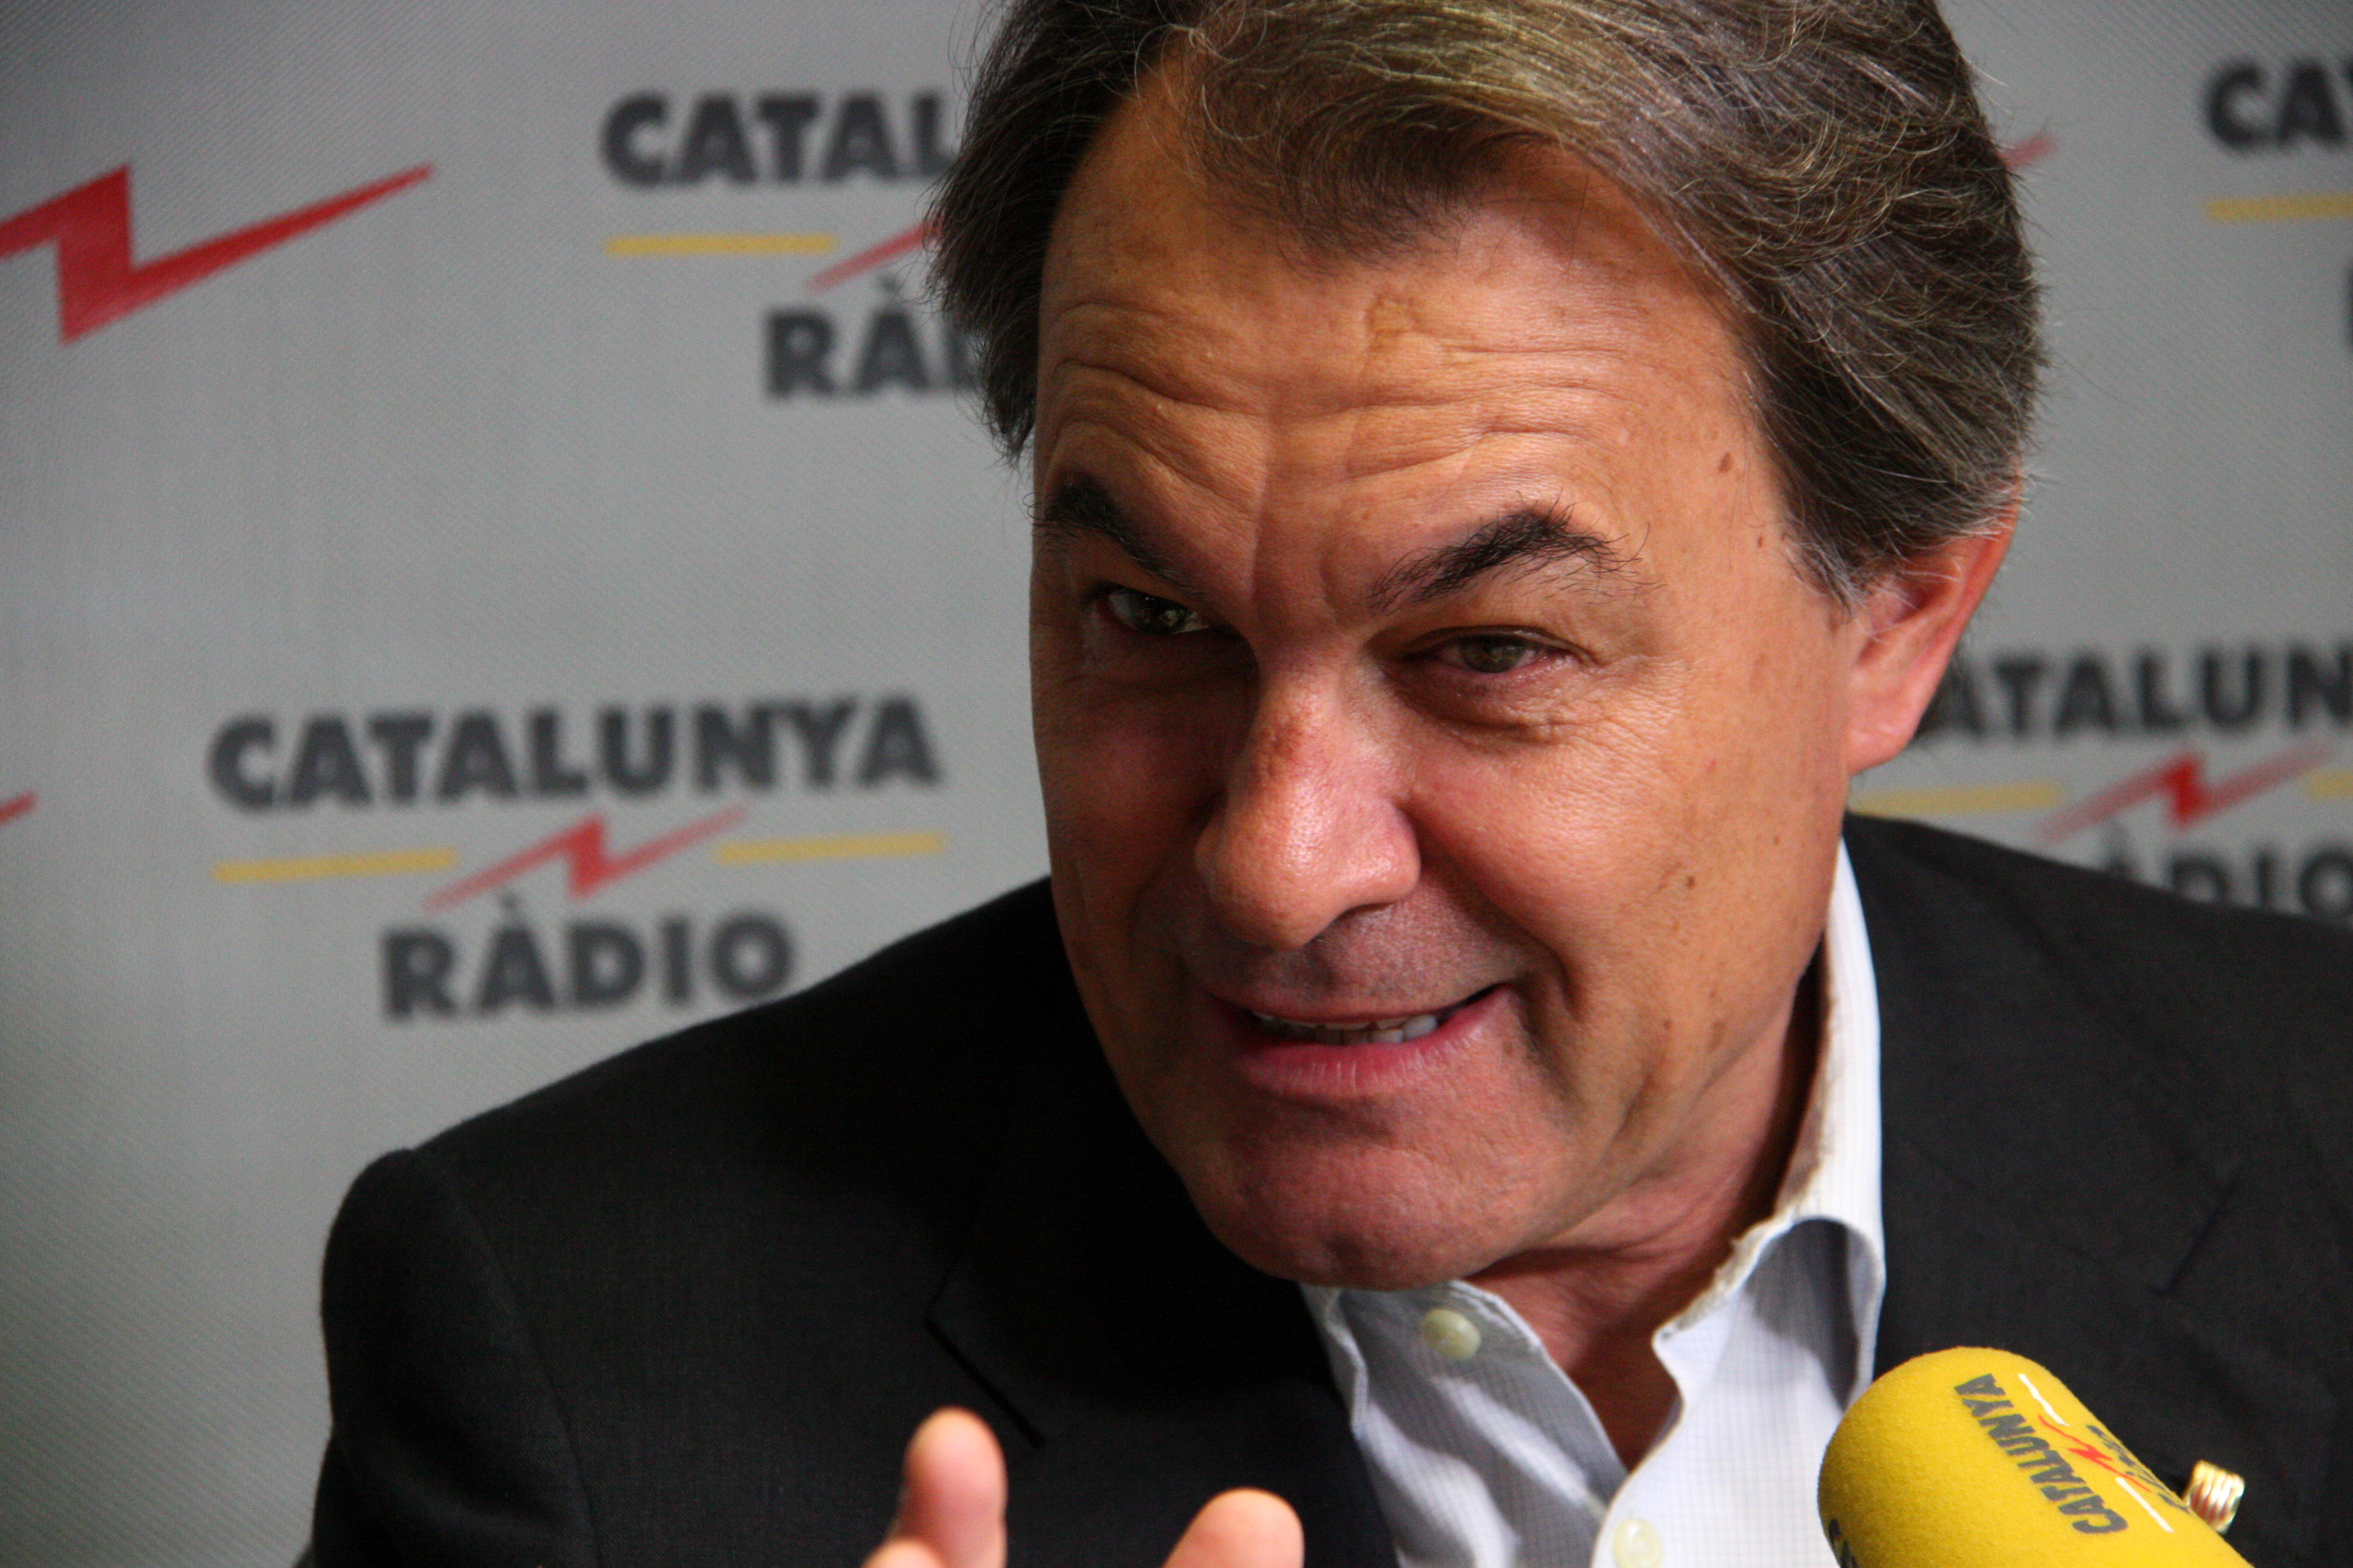 President Mas's interview at Catalunya Radio this morning (by ACN)